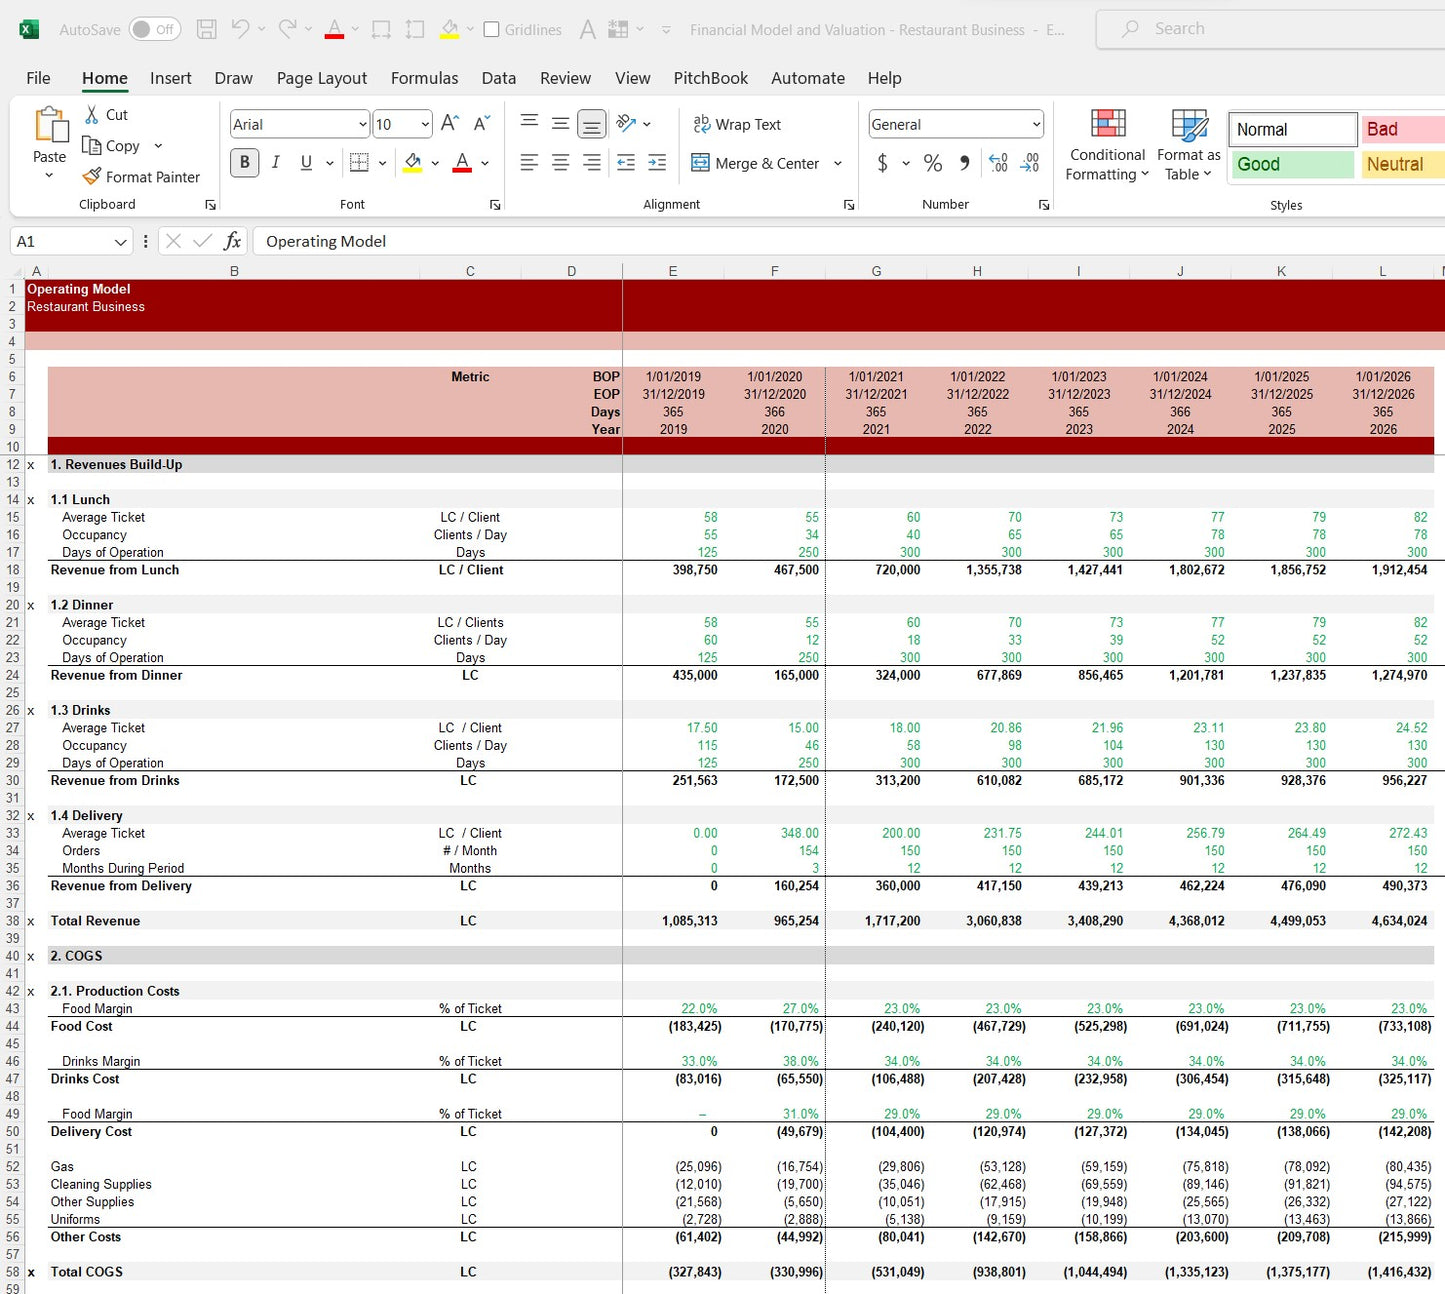 Restaurant Financial Model and Valuation Excel Spreadsheet Template. Operating Modelsnip